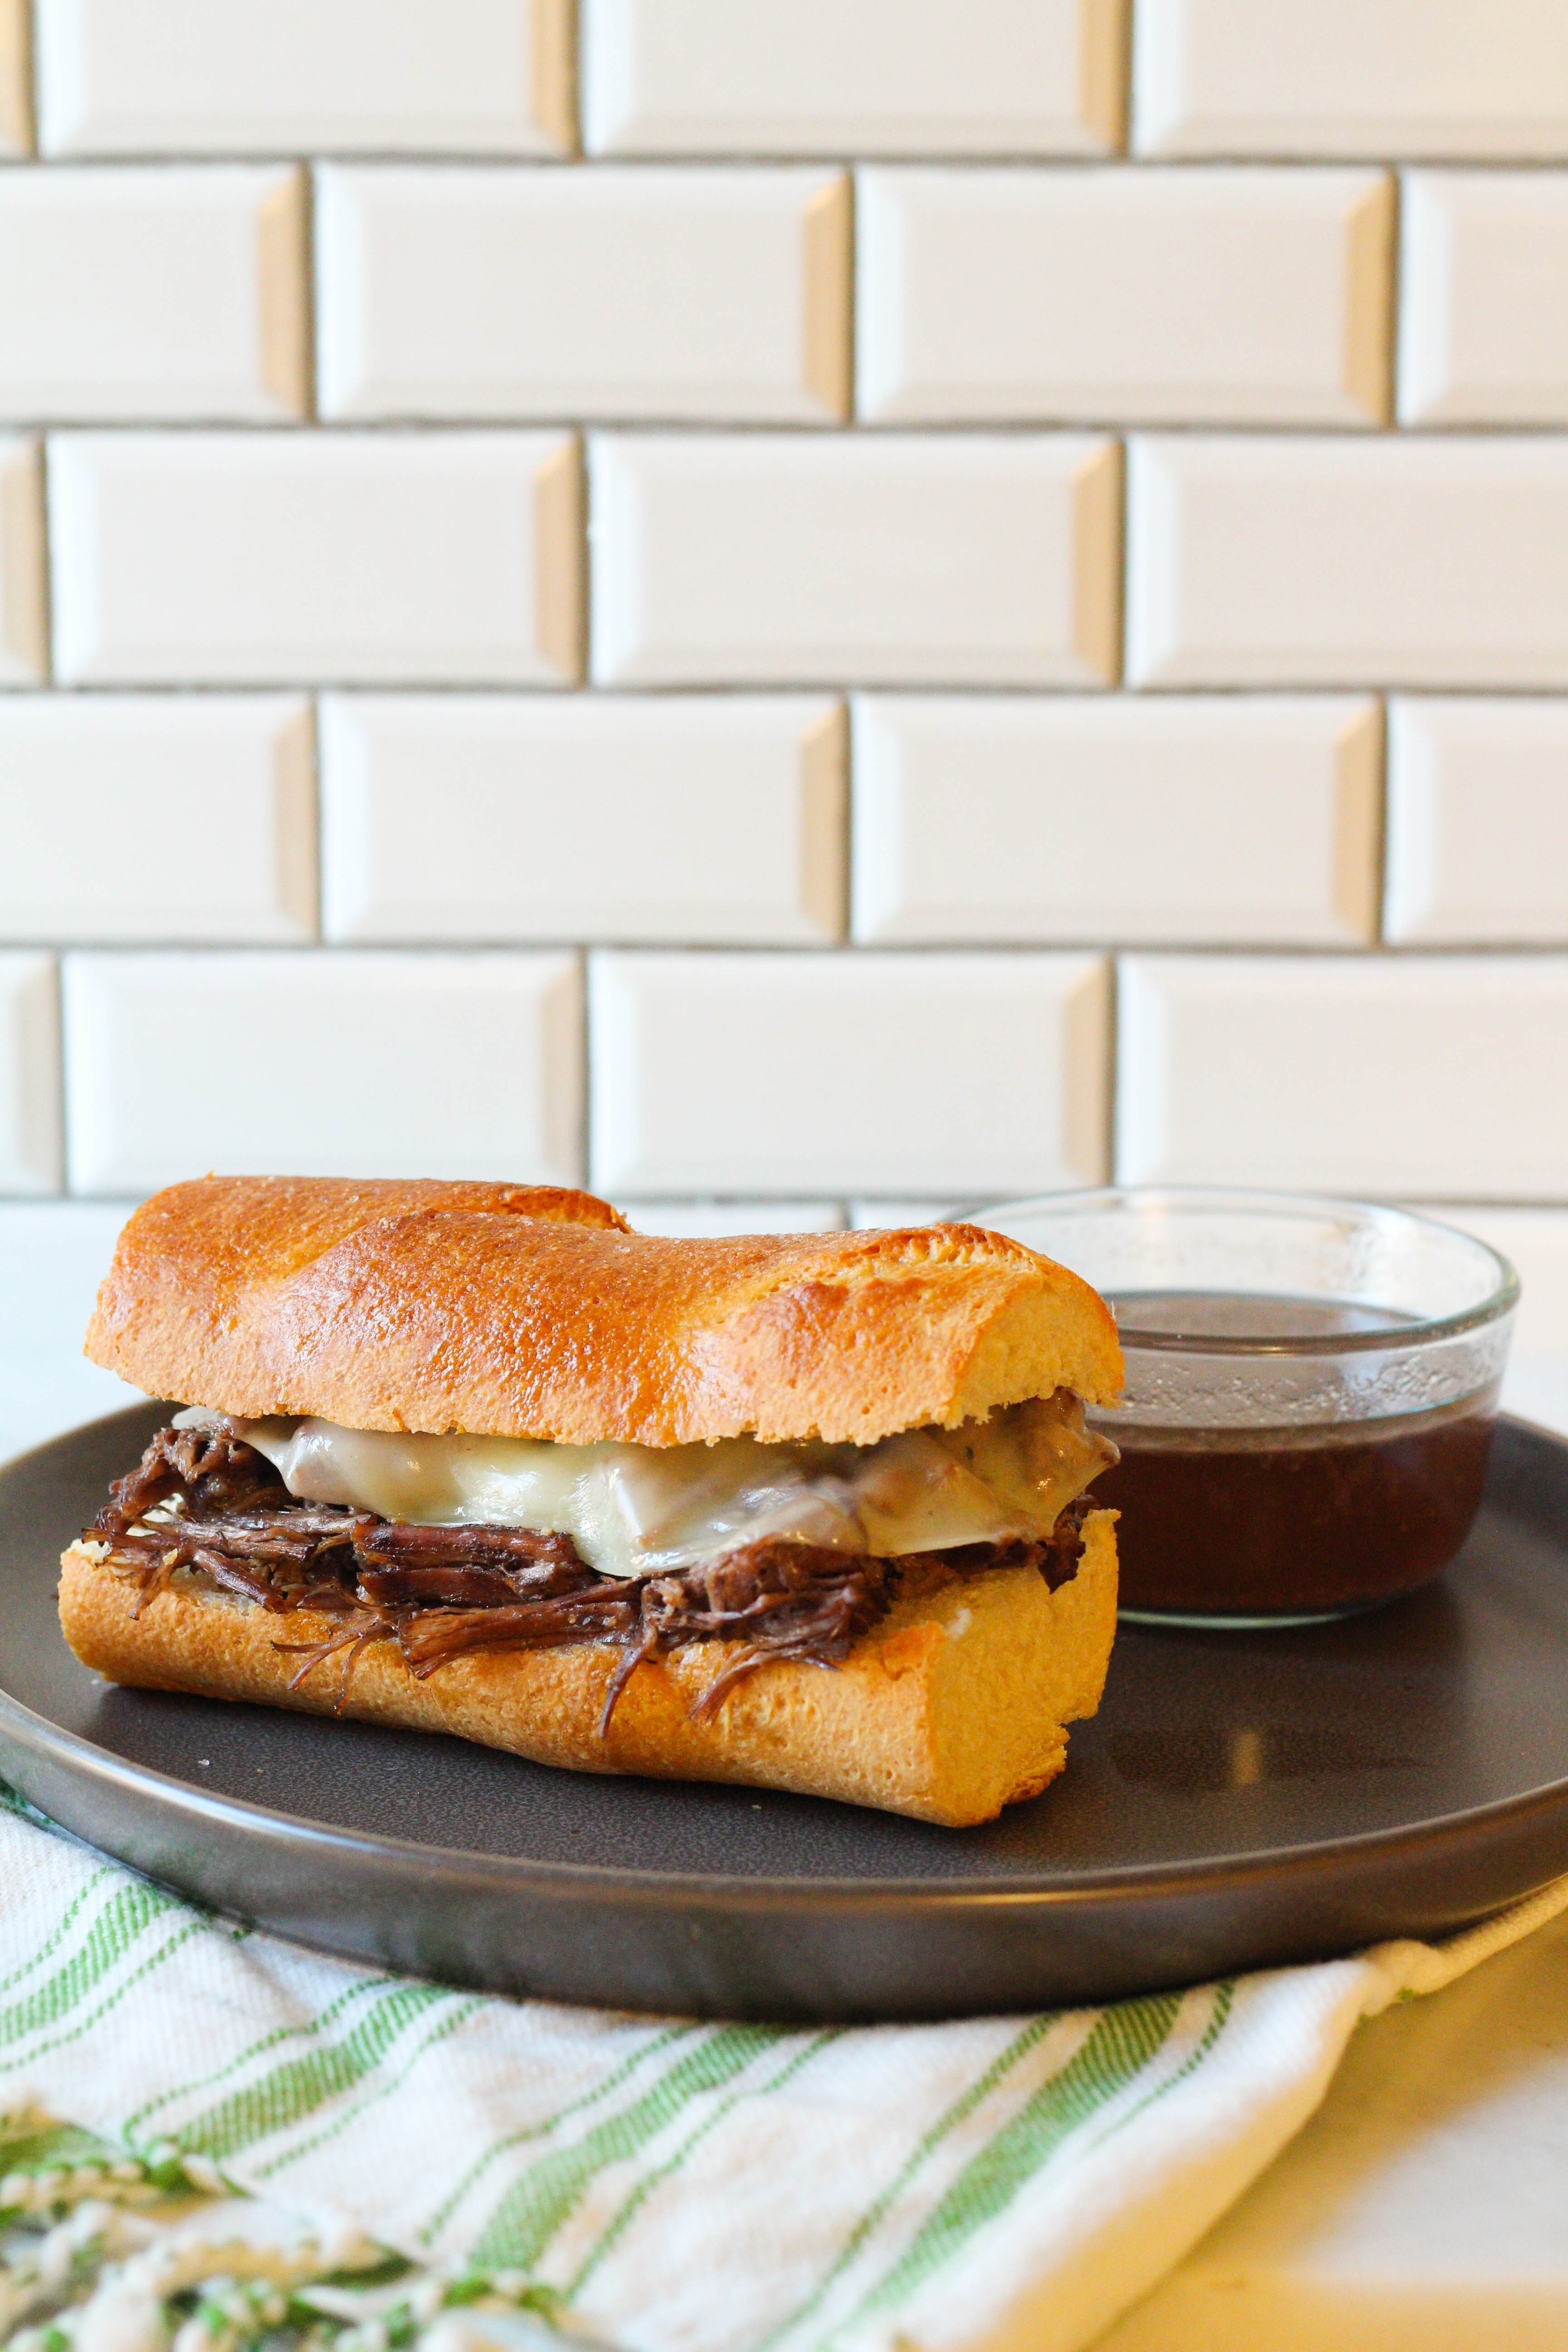 Instant Pot French Dip Sandwiches are a delicious weeknight dinner!